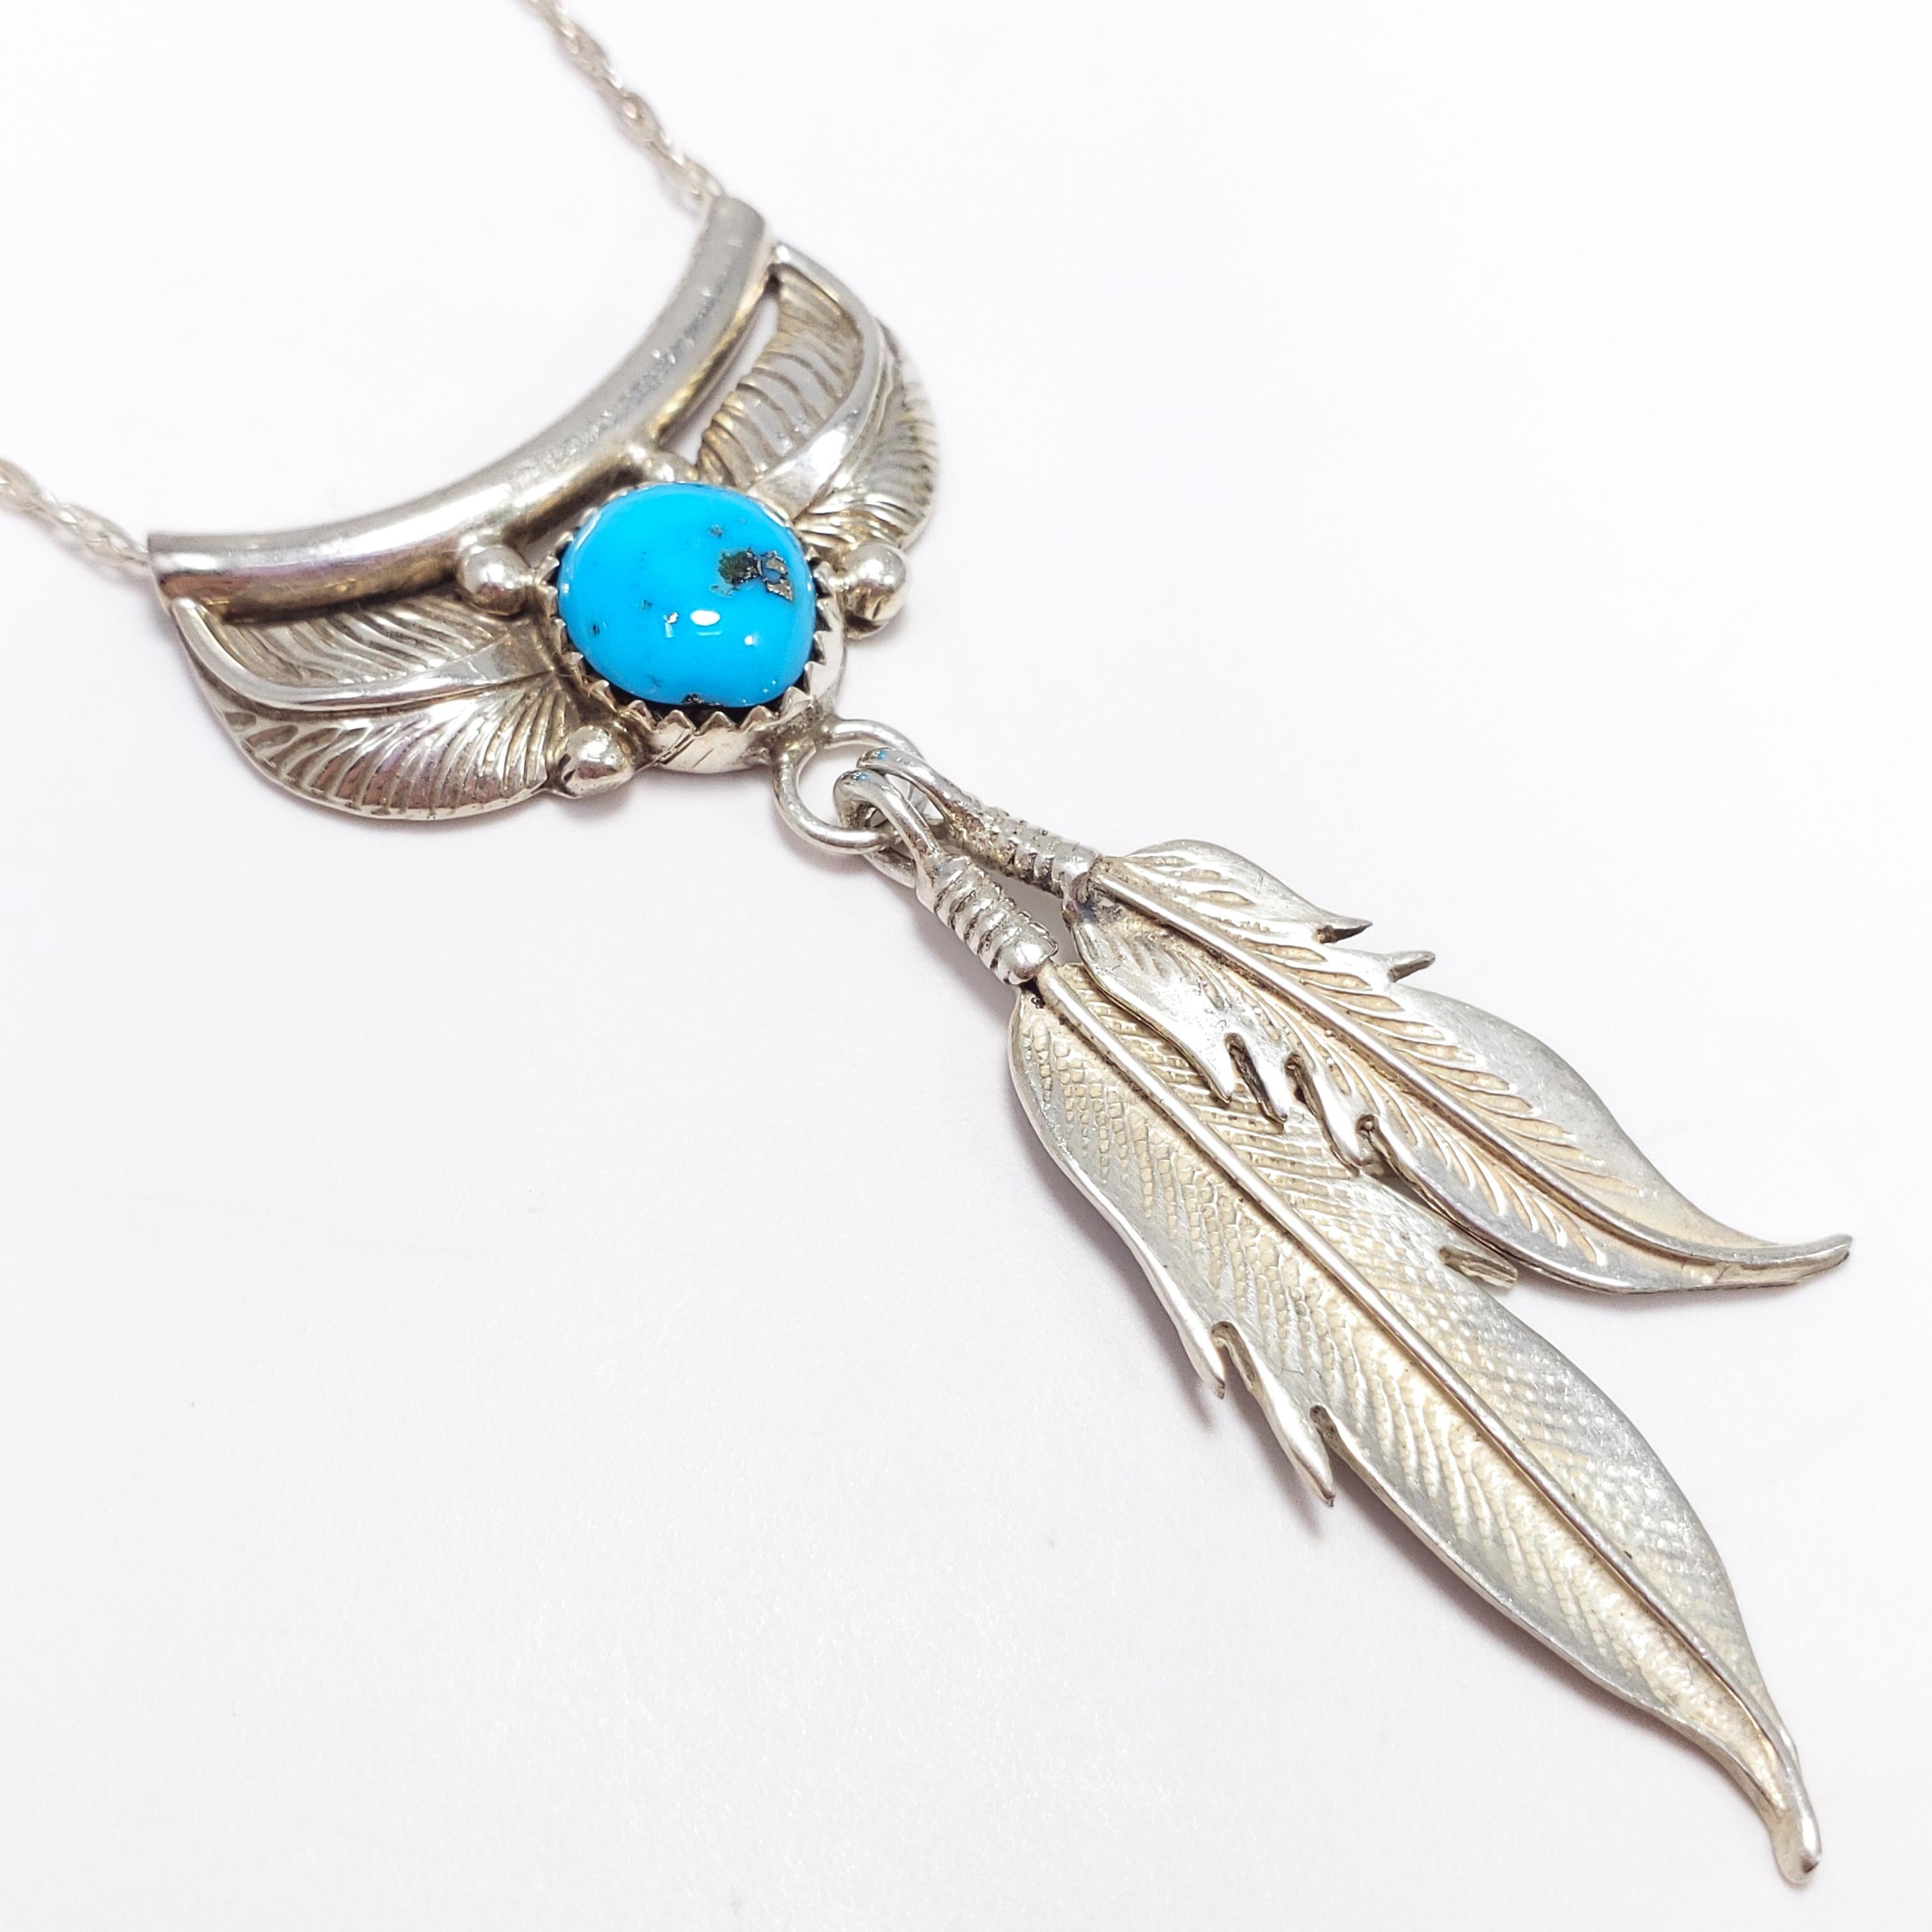 A minimalist Native American Navajo pendant necklace. Features a floral/feather themed pendant motif with a bezel-set natural turquoise stone, accented with two dangling feathers - all sterling silver, including the fine chain.

Hallmarks: Necklace